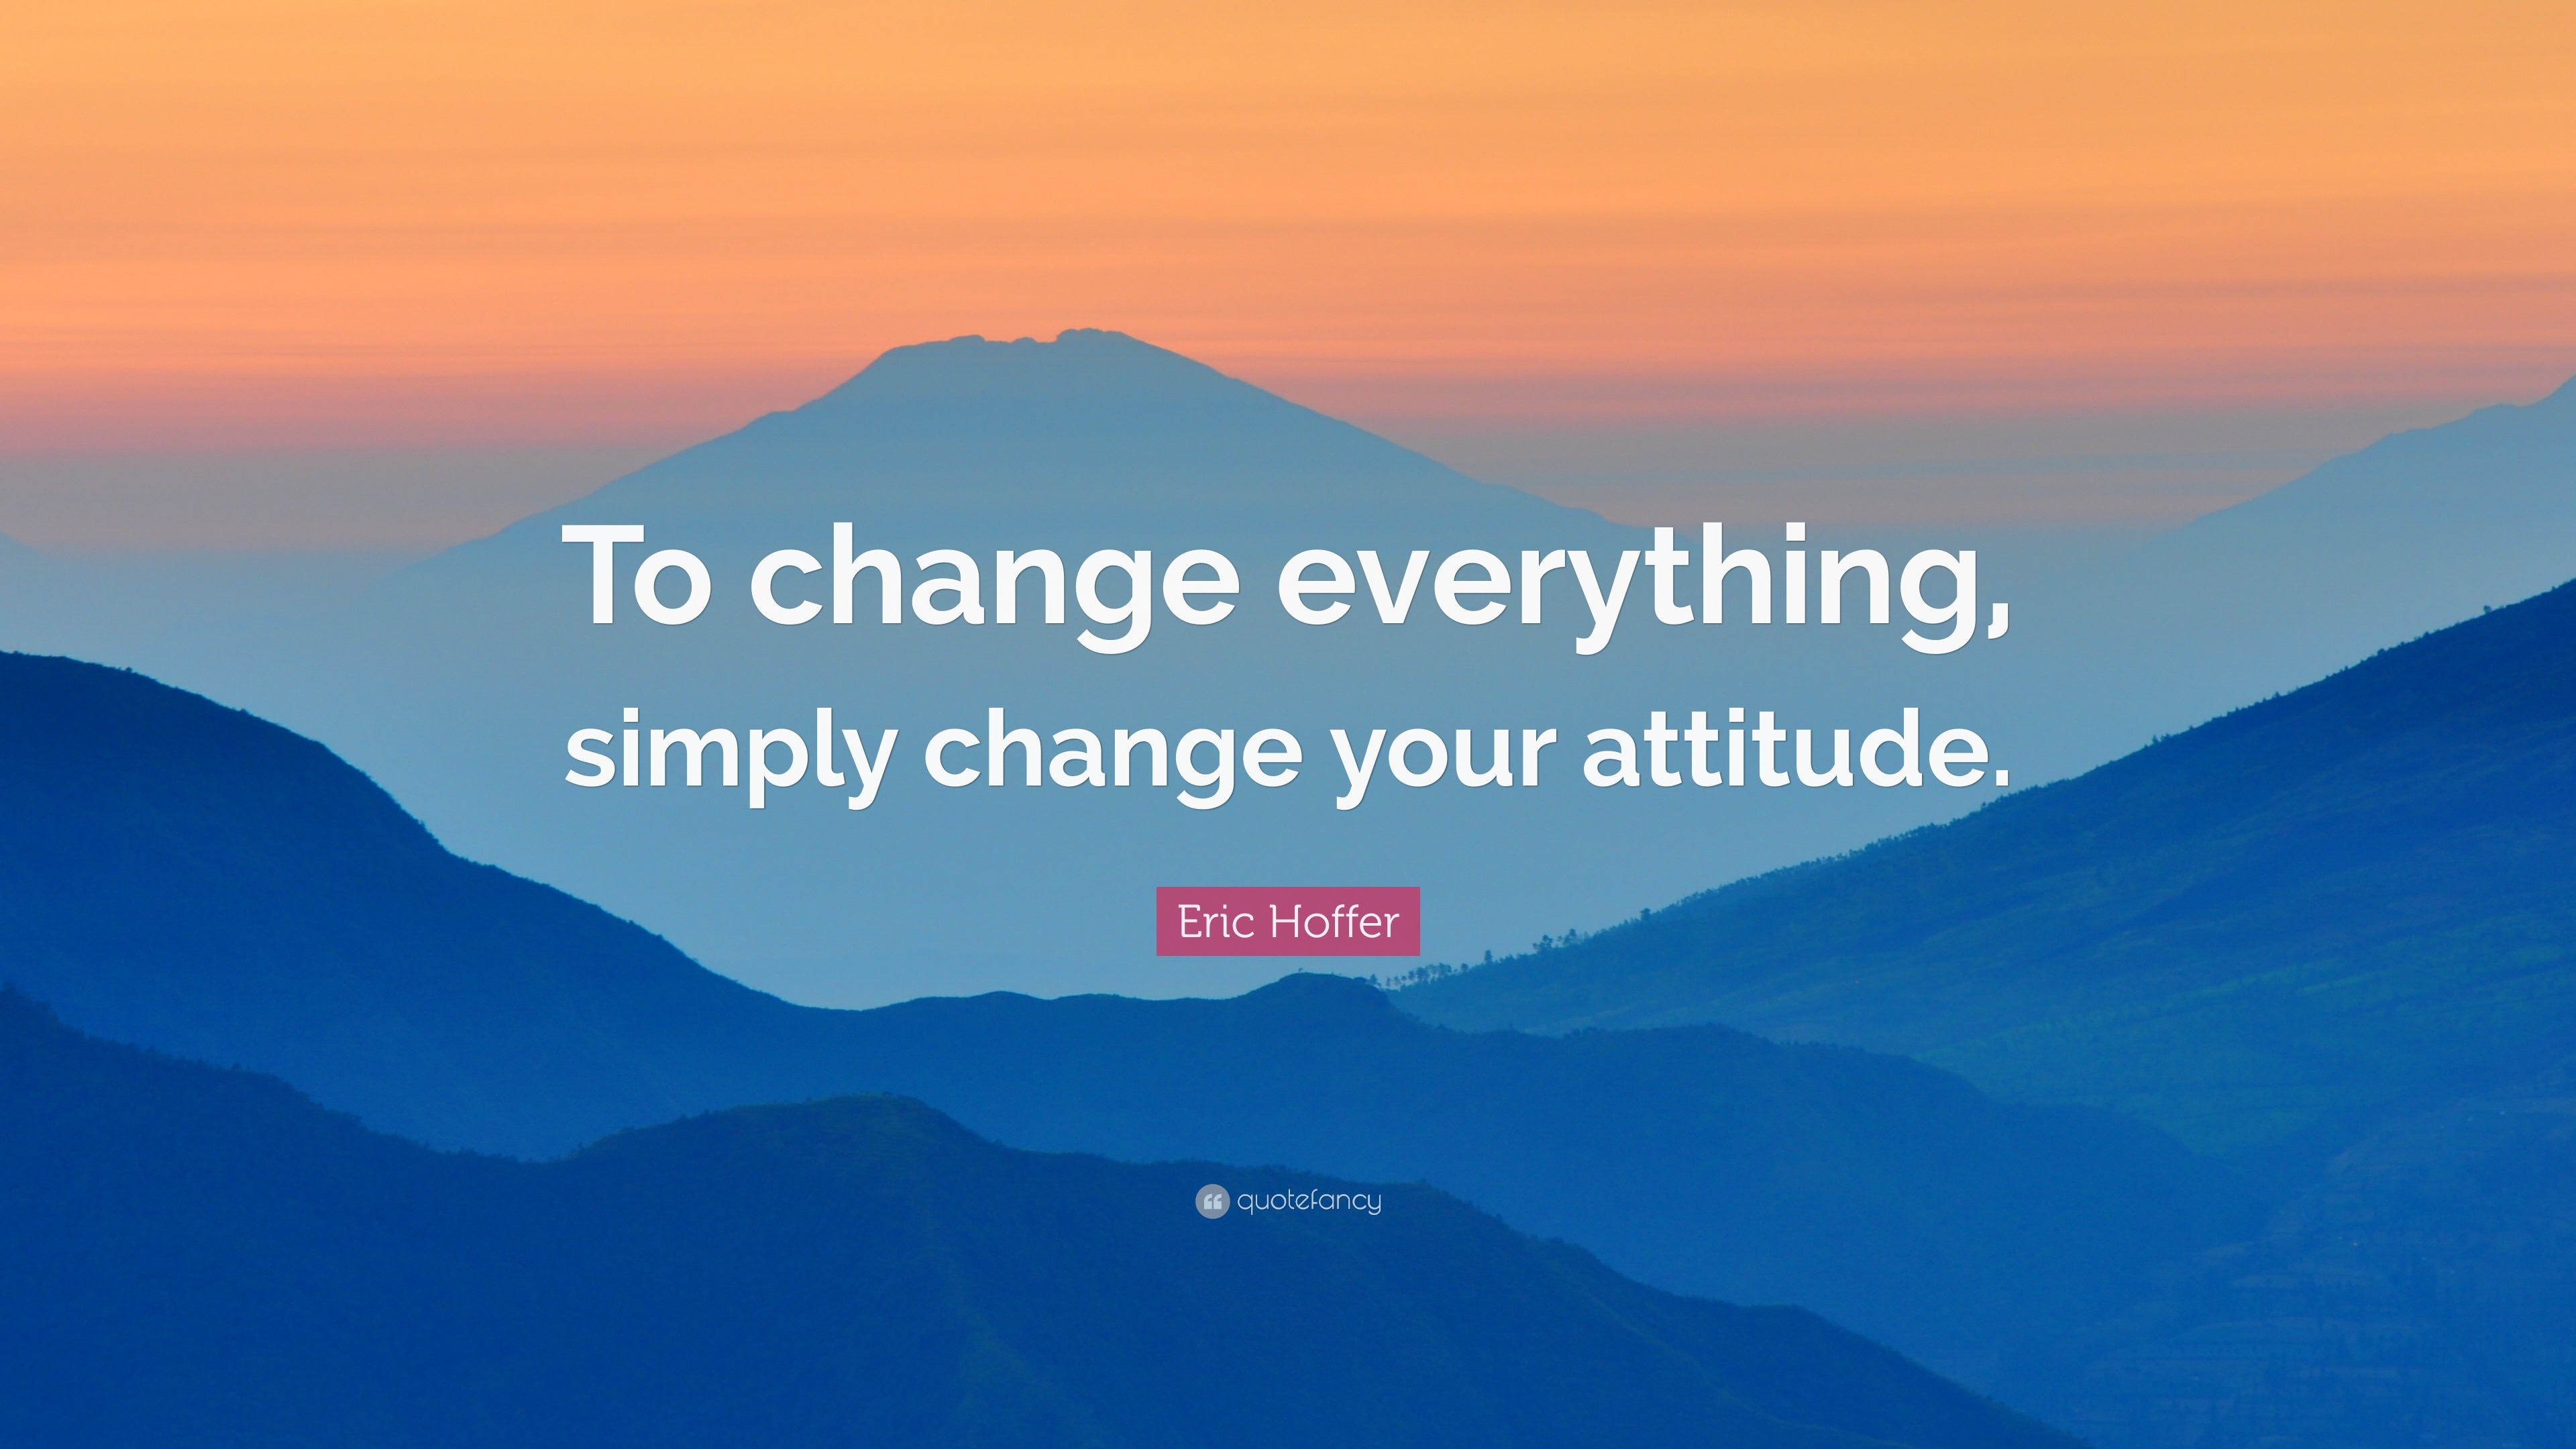 Eric Hoffer Quote: “To change everything, simply change your